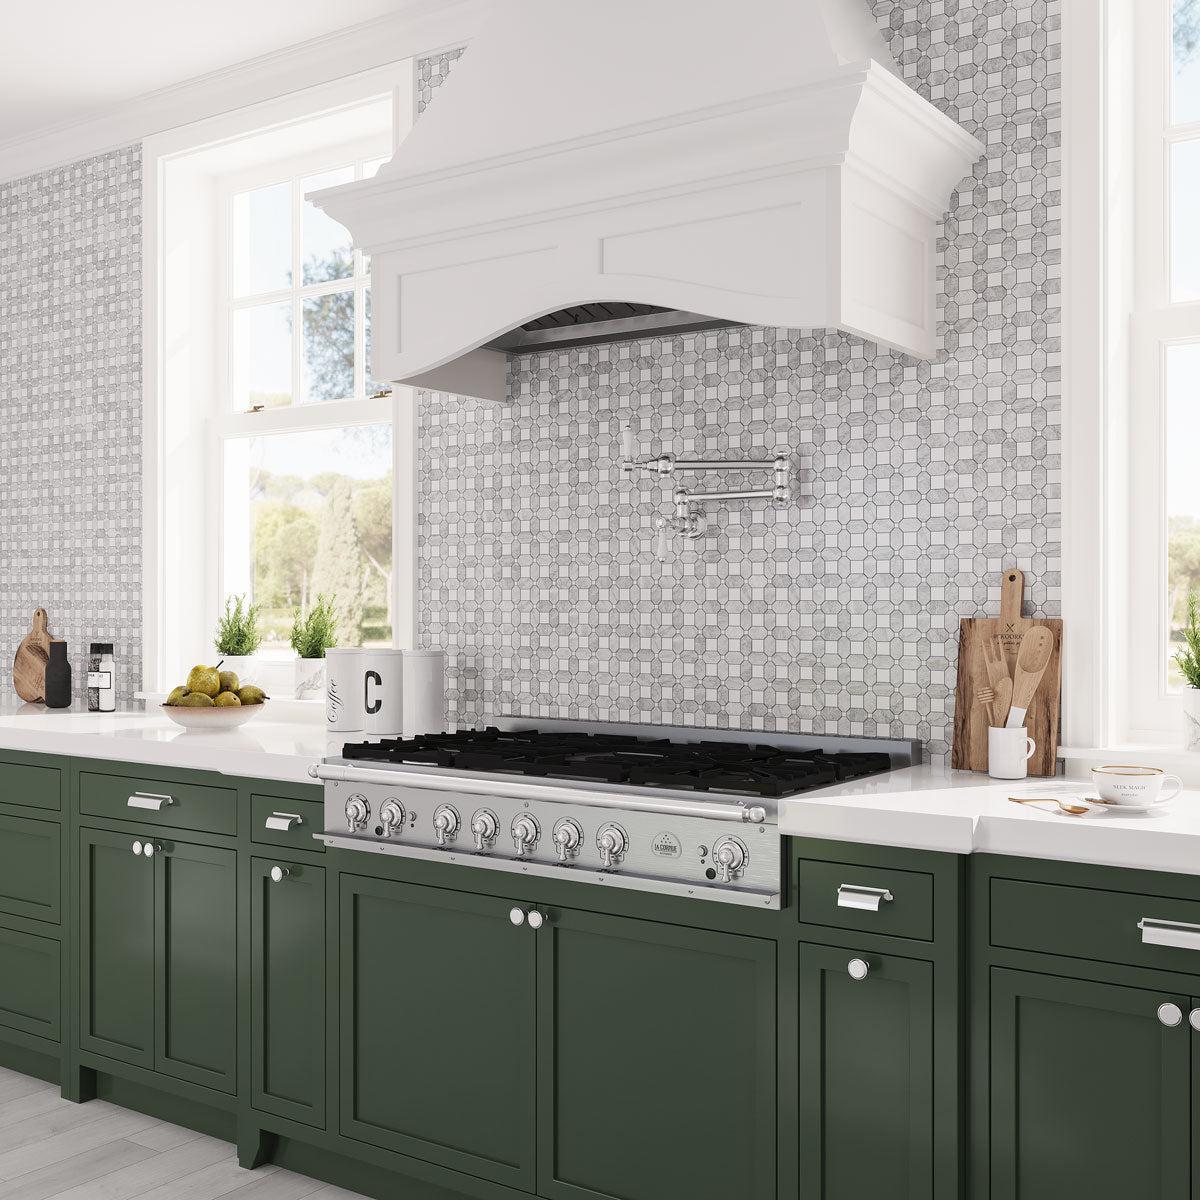 Traditional kitchen style with a modern flair thanks to Carrara and Thassos marble patterned backsplash and forest green cabinets